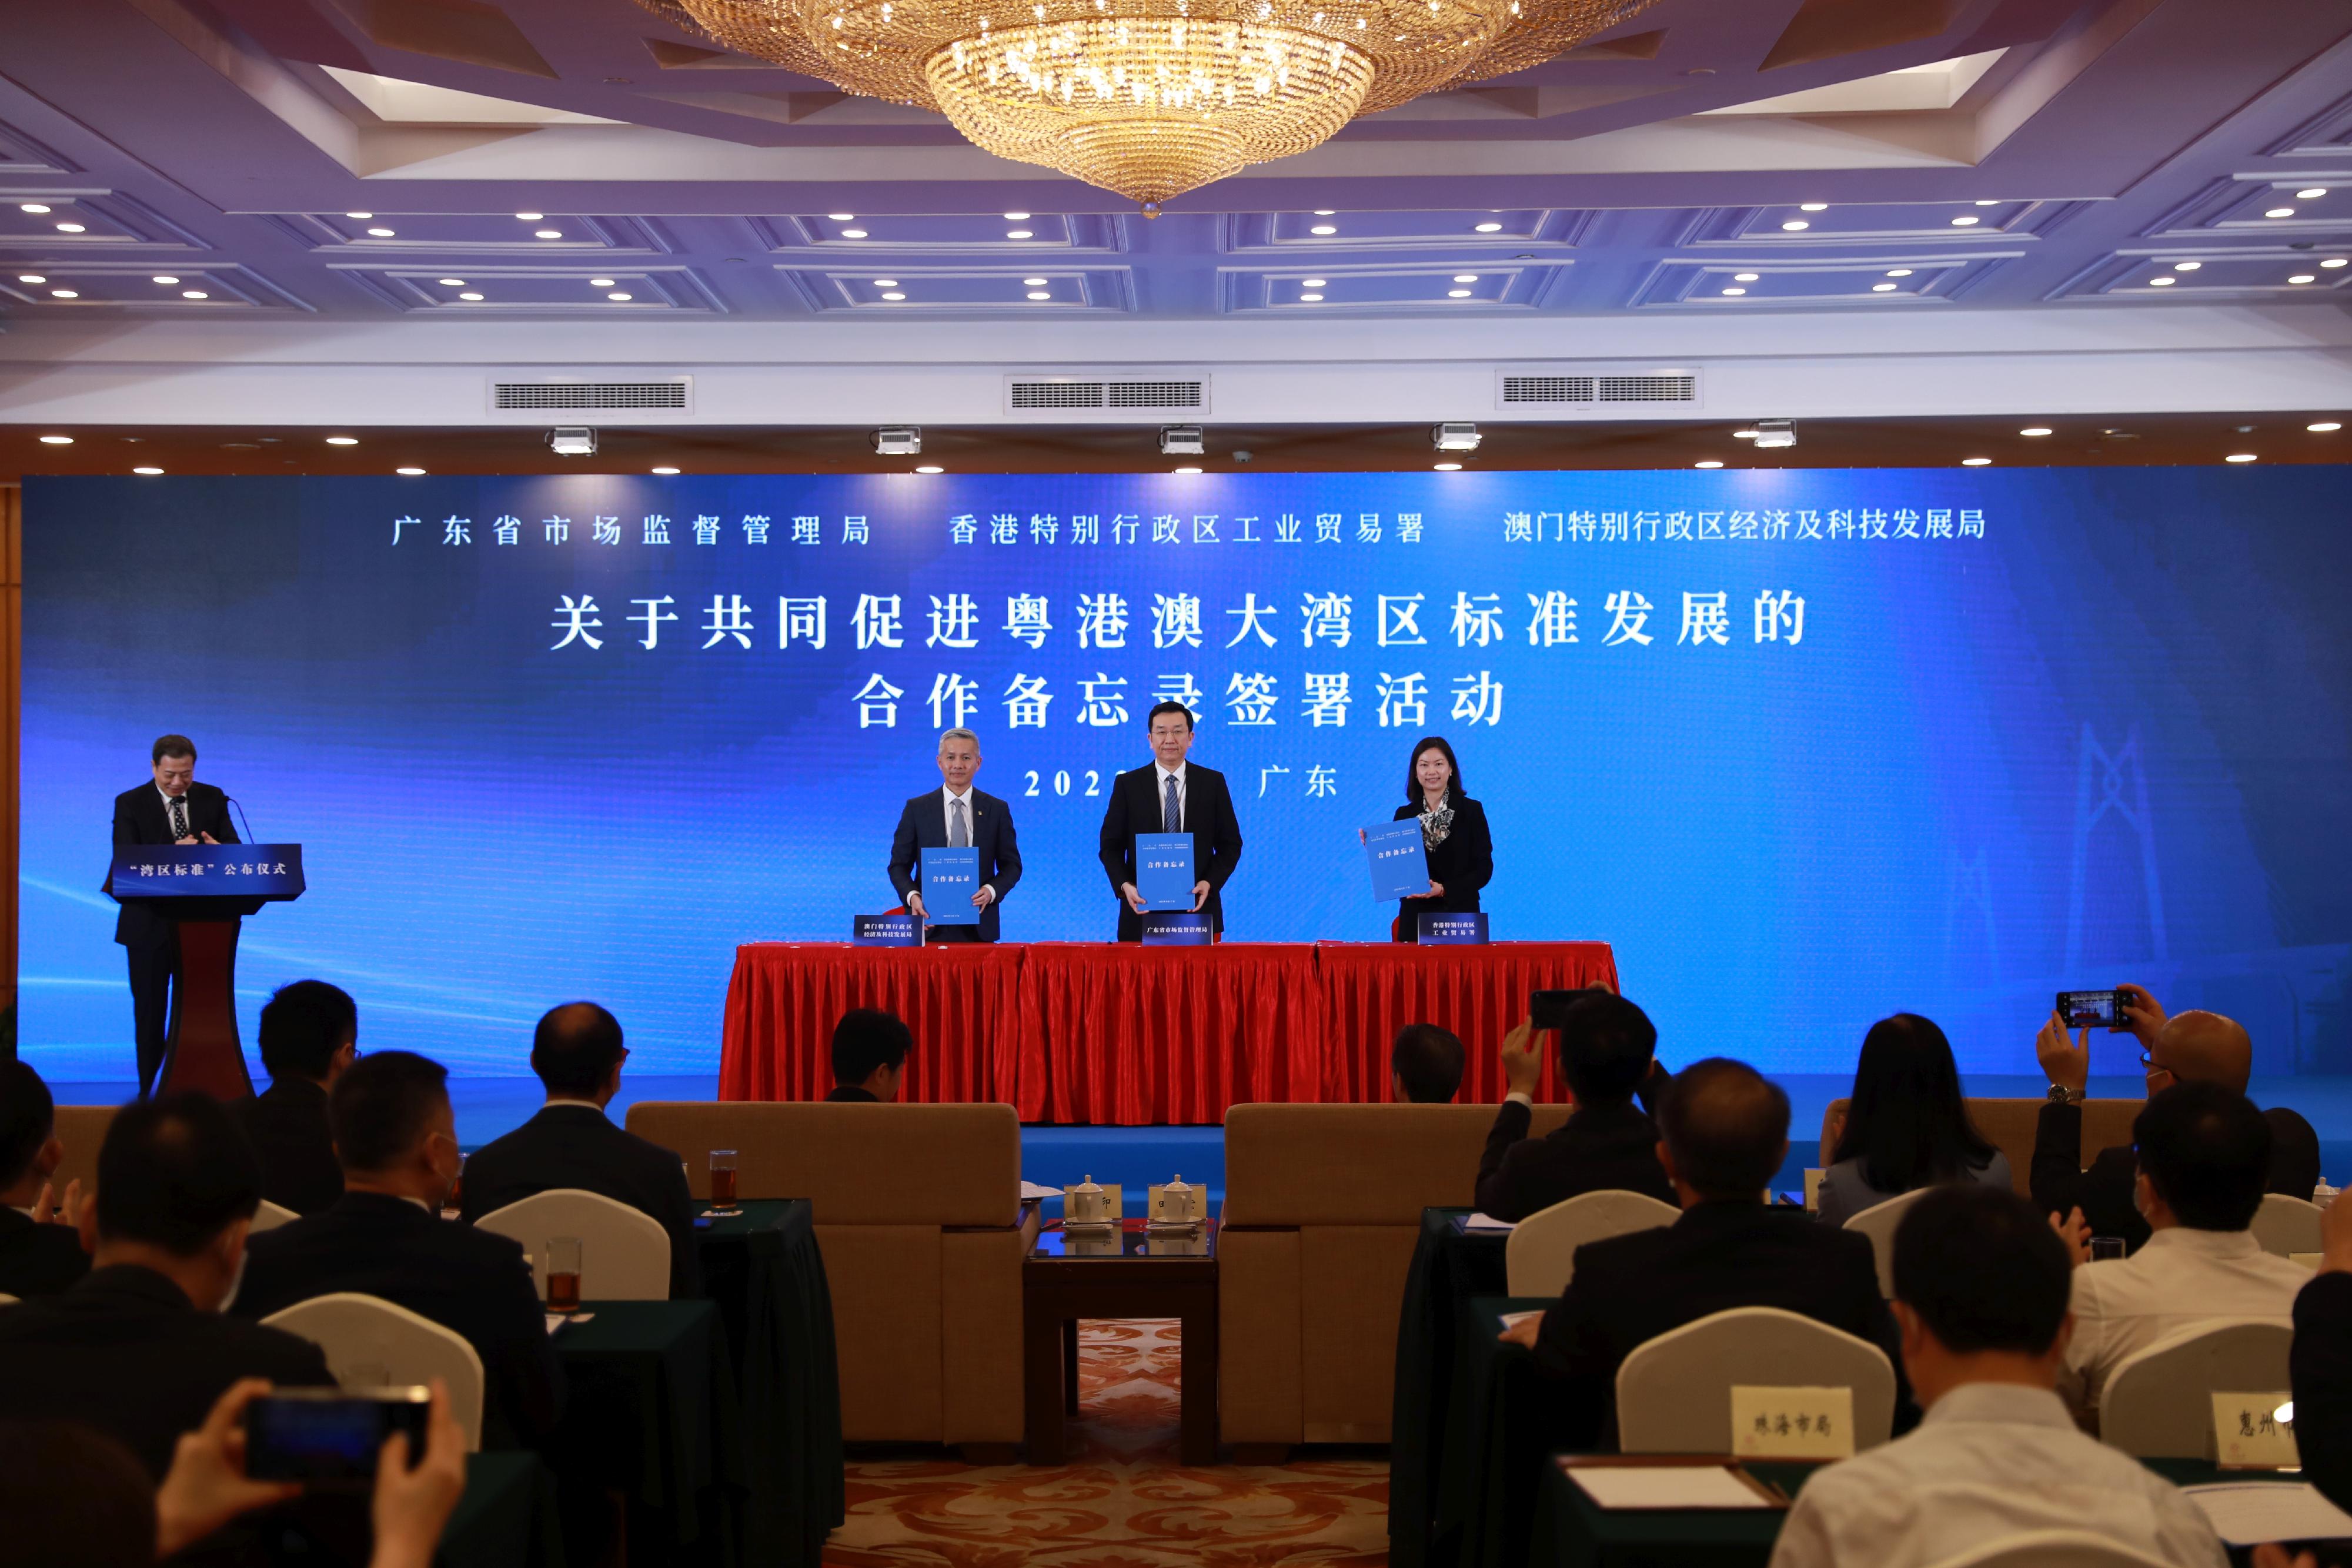 (From right) The Director-General of Trade and Industry, Ms Maggie Wong, is pictured with the Director of the Guangdong Administration for Market Regulation, Mr Liu Guangming, and the Director of the Economic and Technological Development Bureau of the Government of the Macao Special Administrative Region, Mr Tai Kin-ip, after signing the Memorandum of Understanding on jointly promoting the development of standards in the Guangdong-Hong Kong-Macao Greater Bay Area today (April 24).